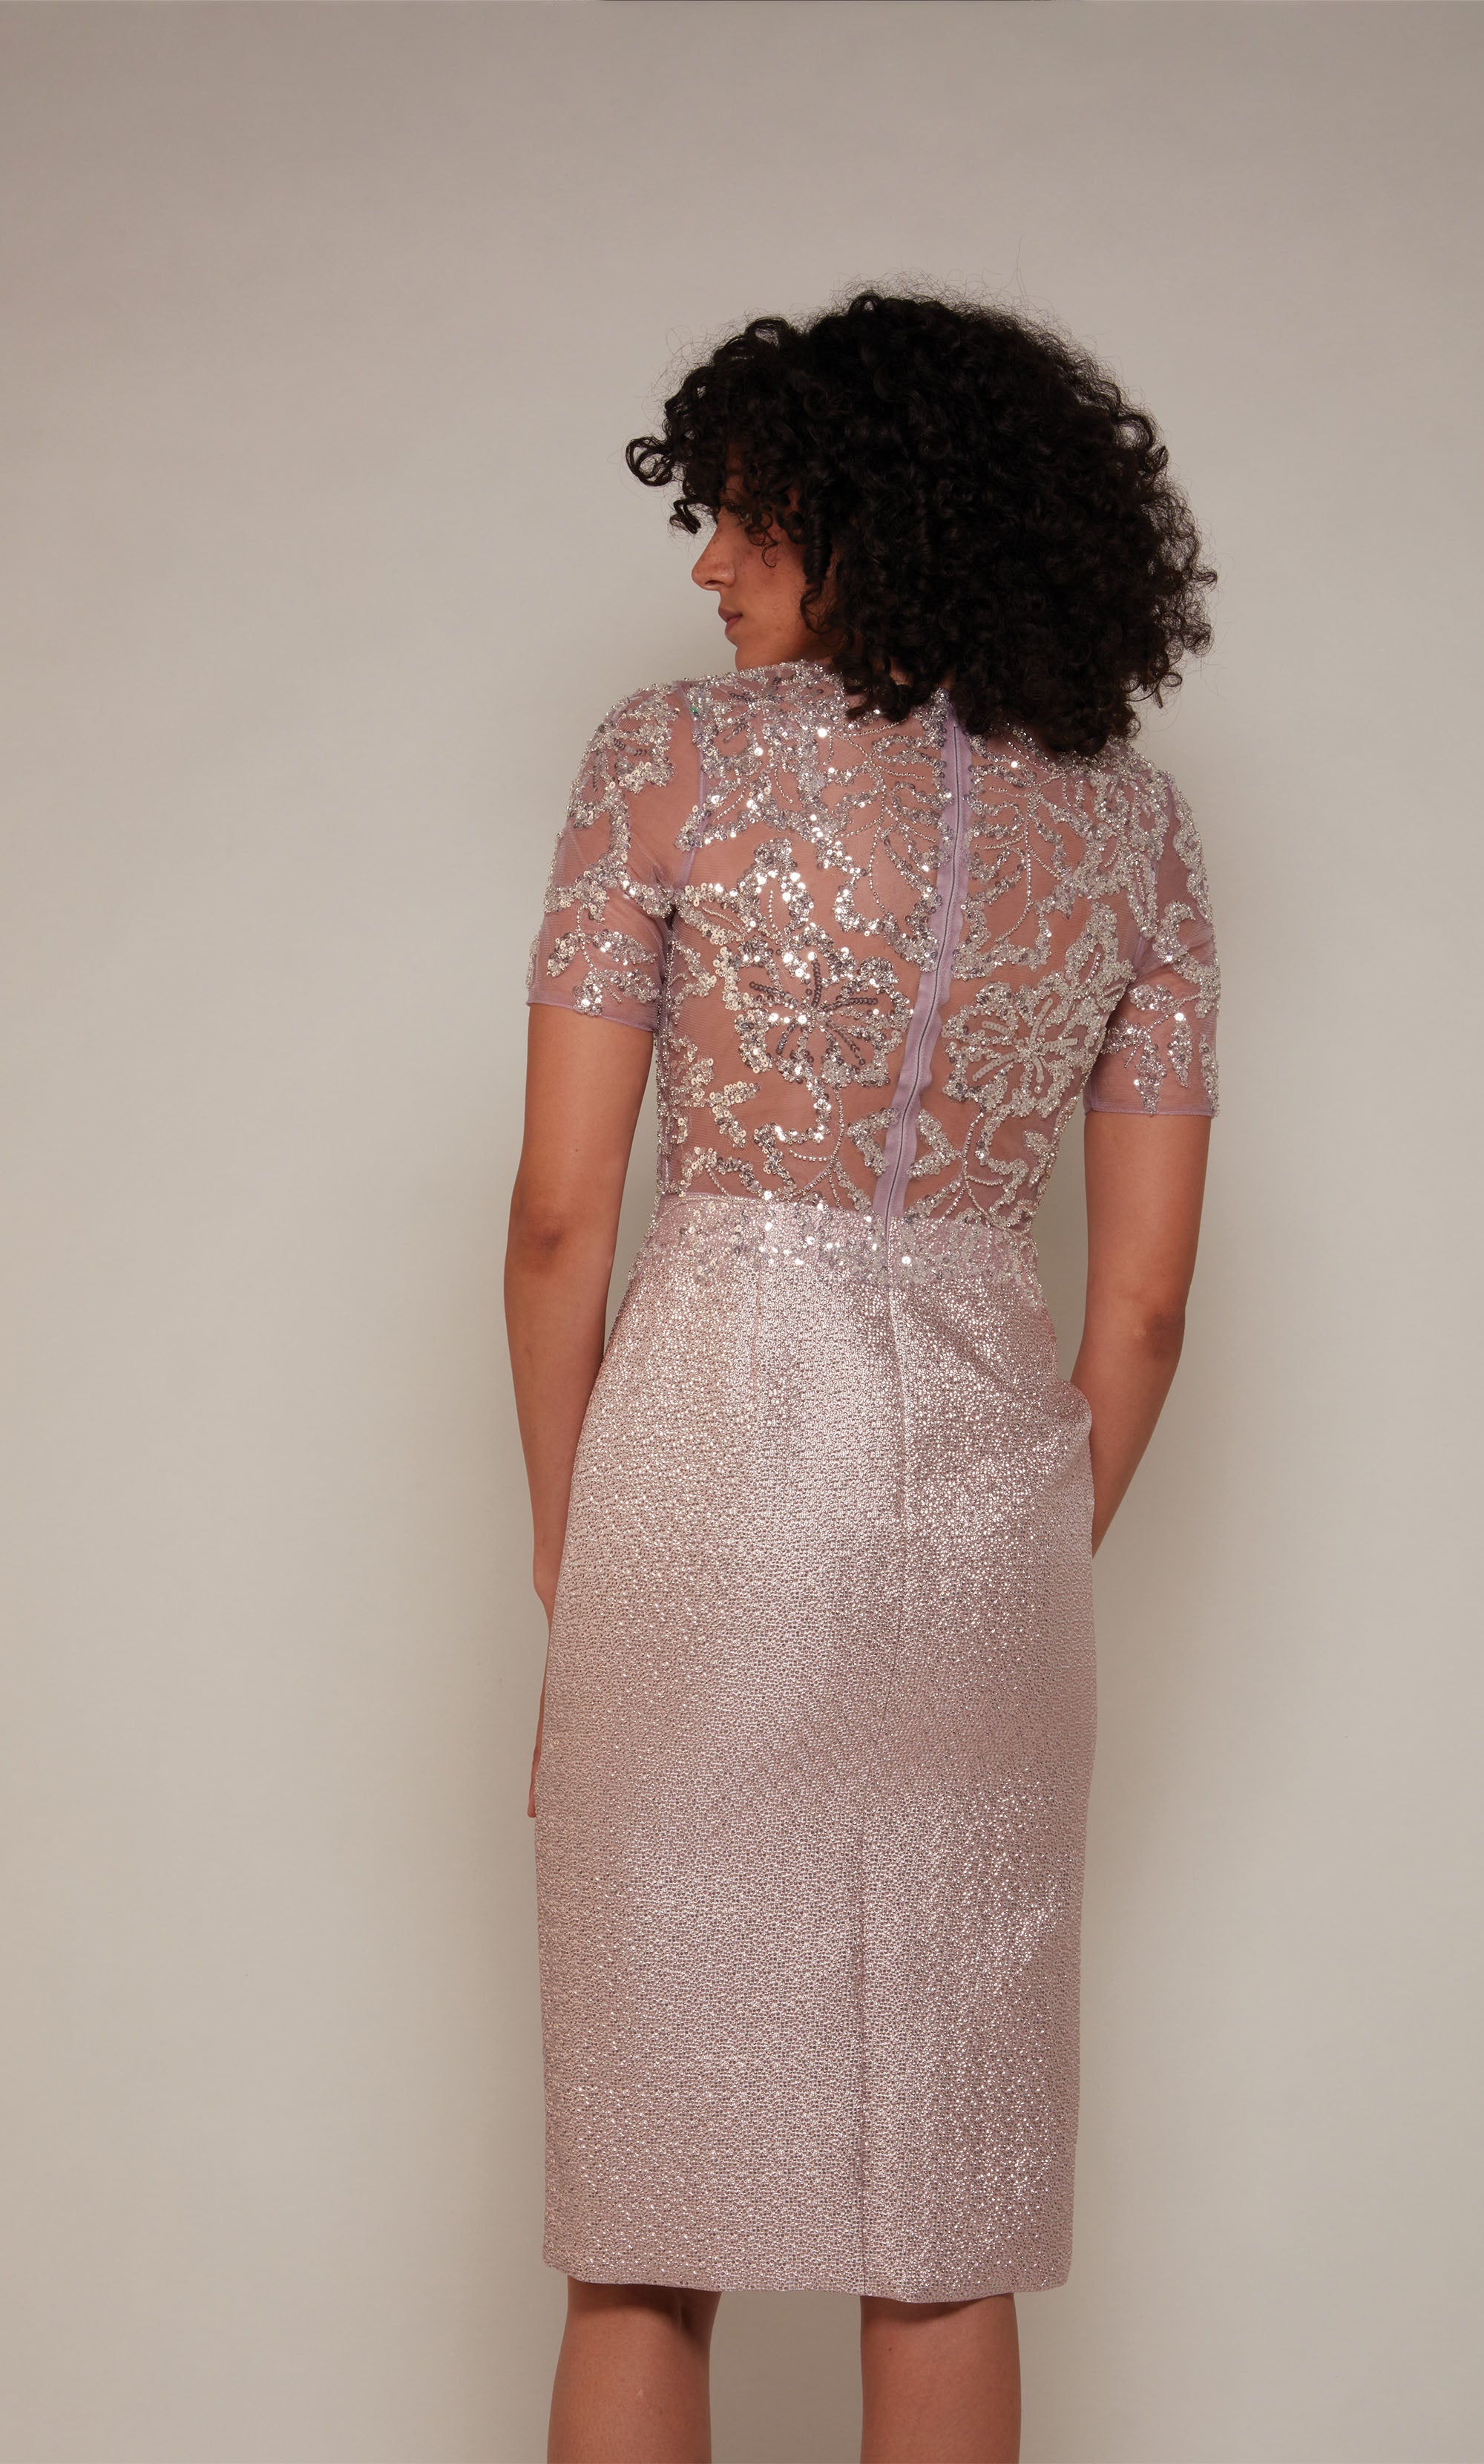 A knee length mother of the bride dress with an illusion neckline and short sleeves in a light pink colored Jacquard.